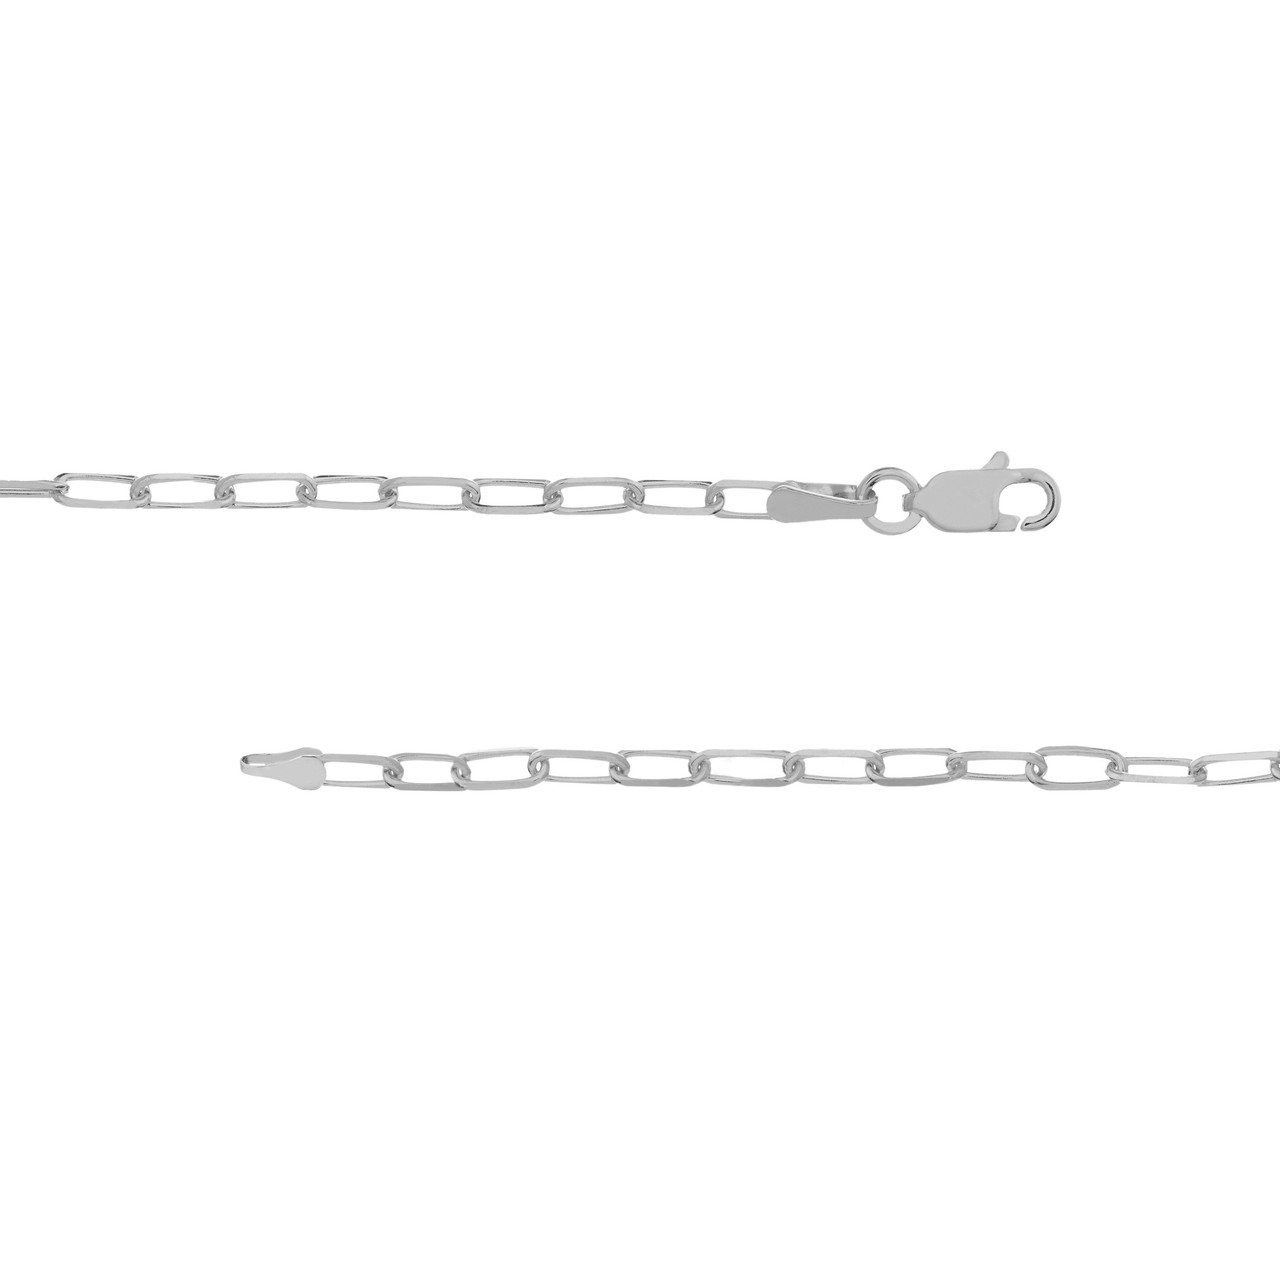 2.2mm Paper Clip Chain with Lobster Lock